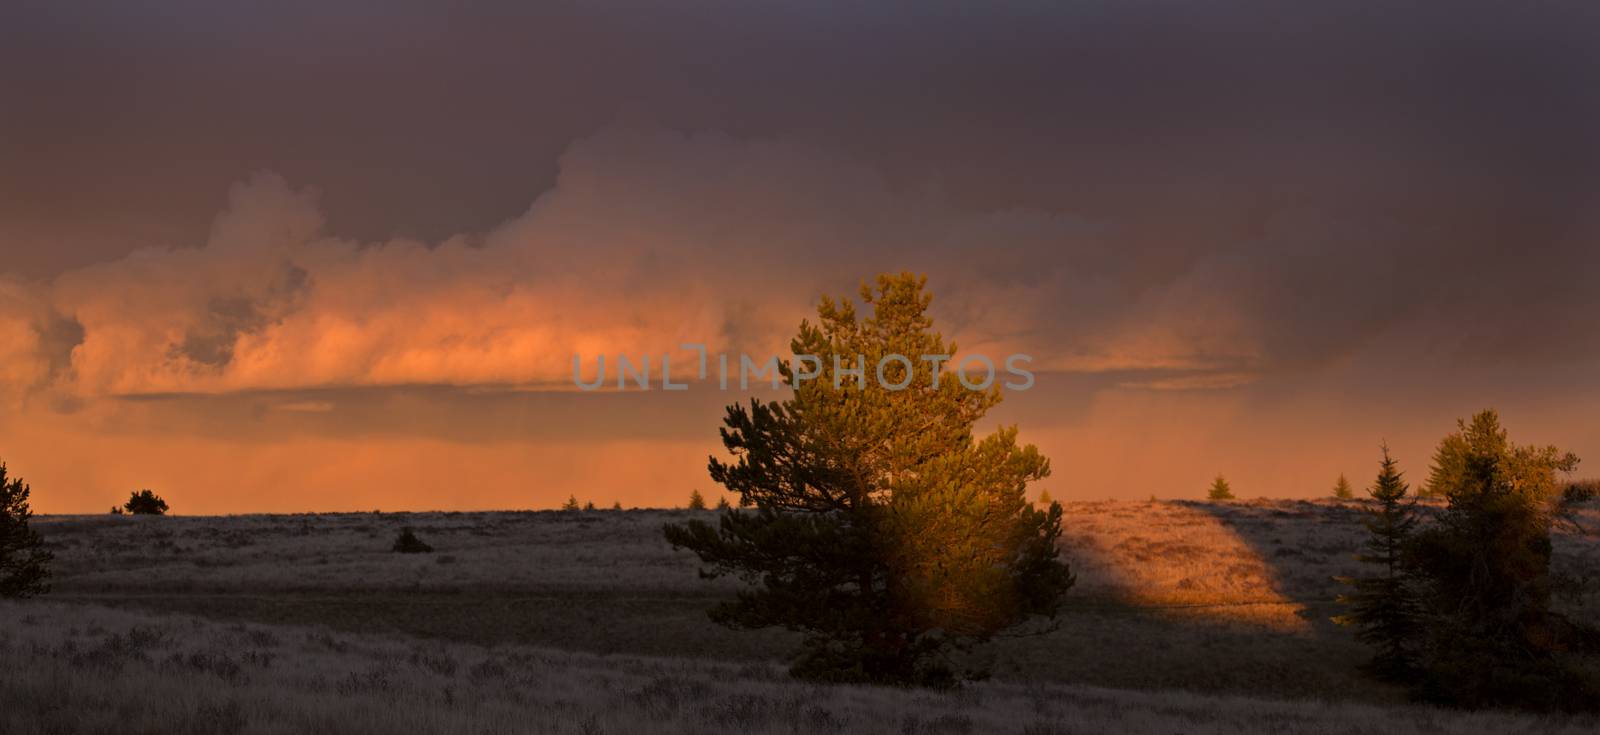 Cypress Hills Sunset by pictureguy